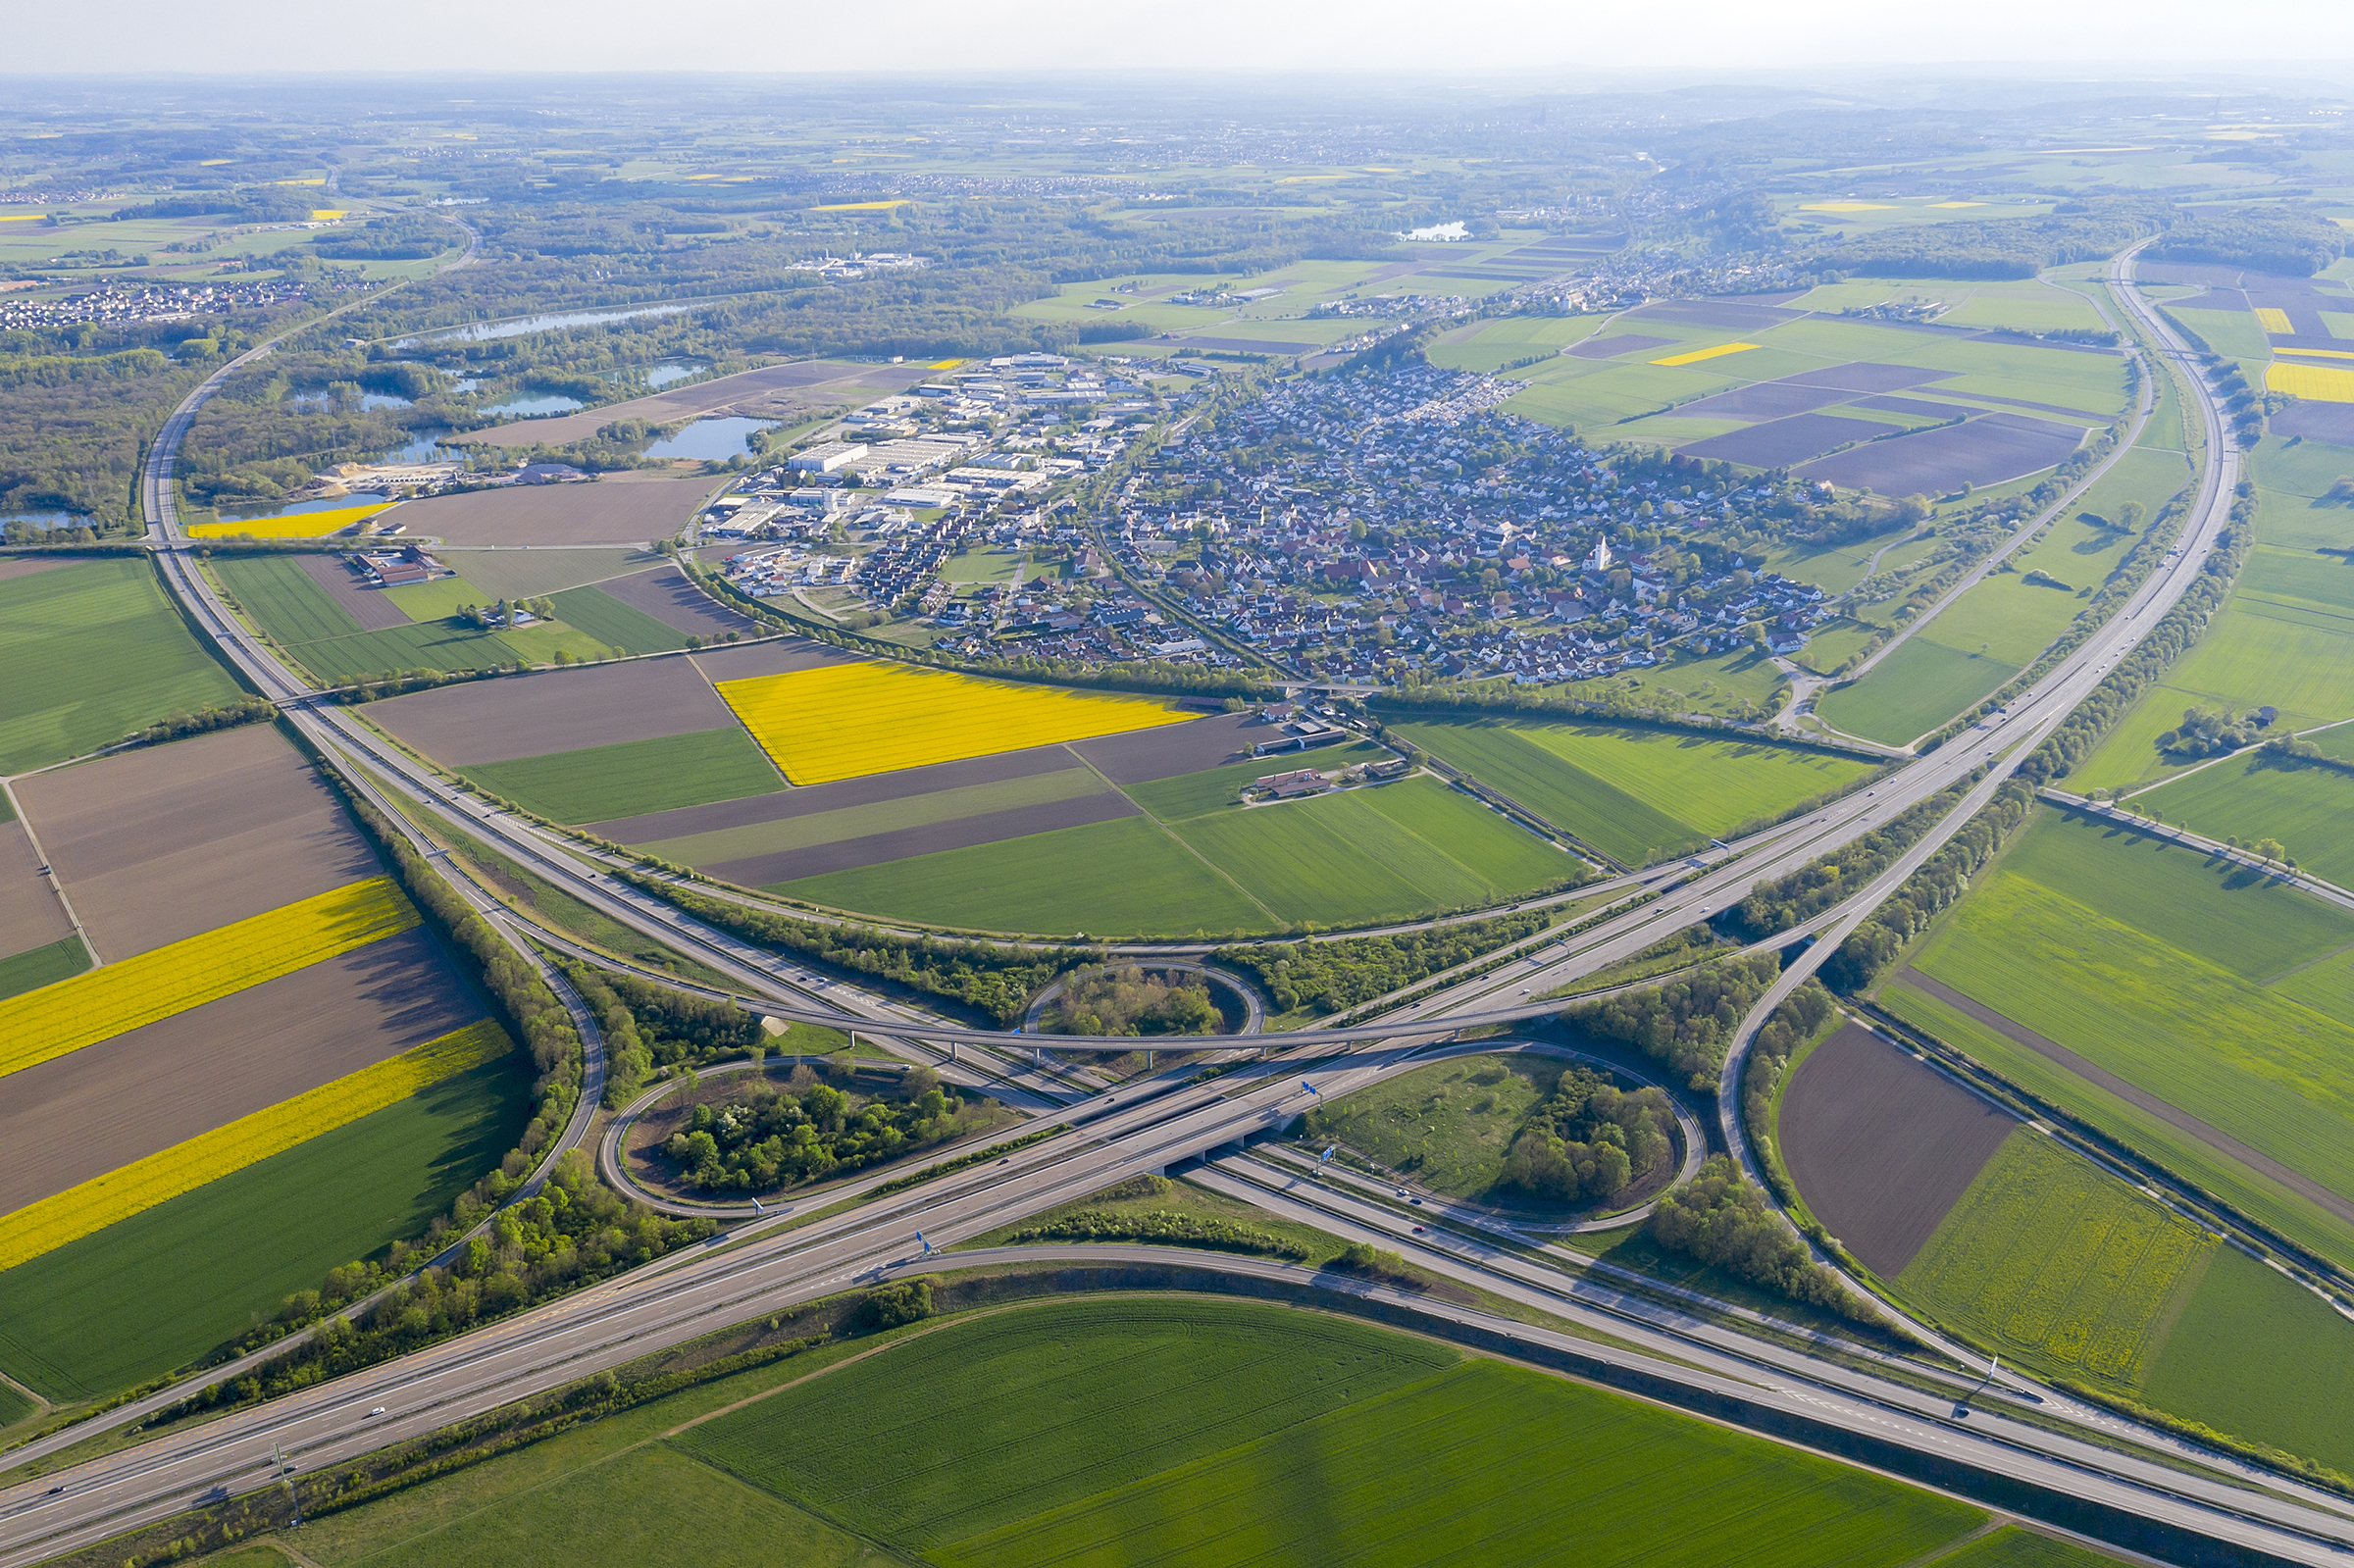 Cross of two motorways surrounded by fields and a town in the background